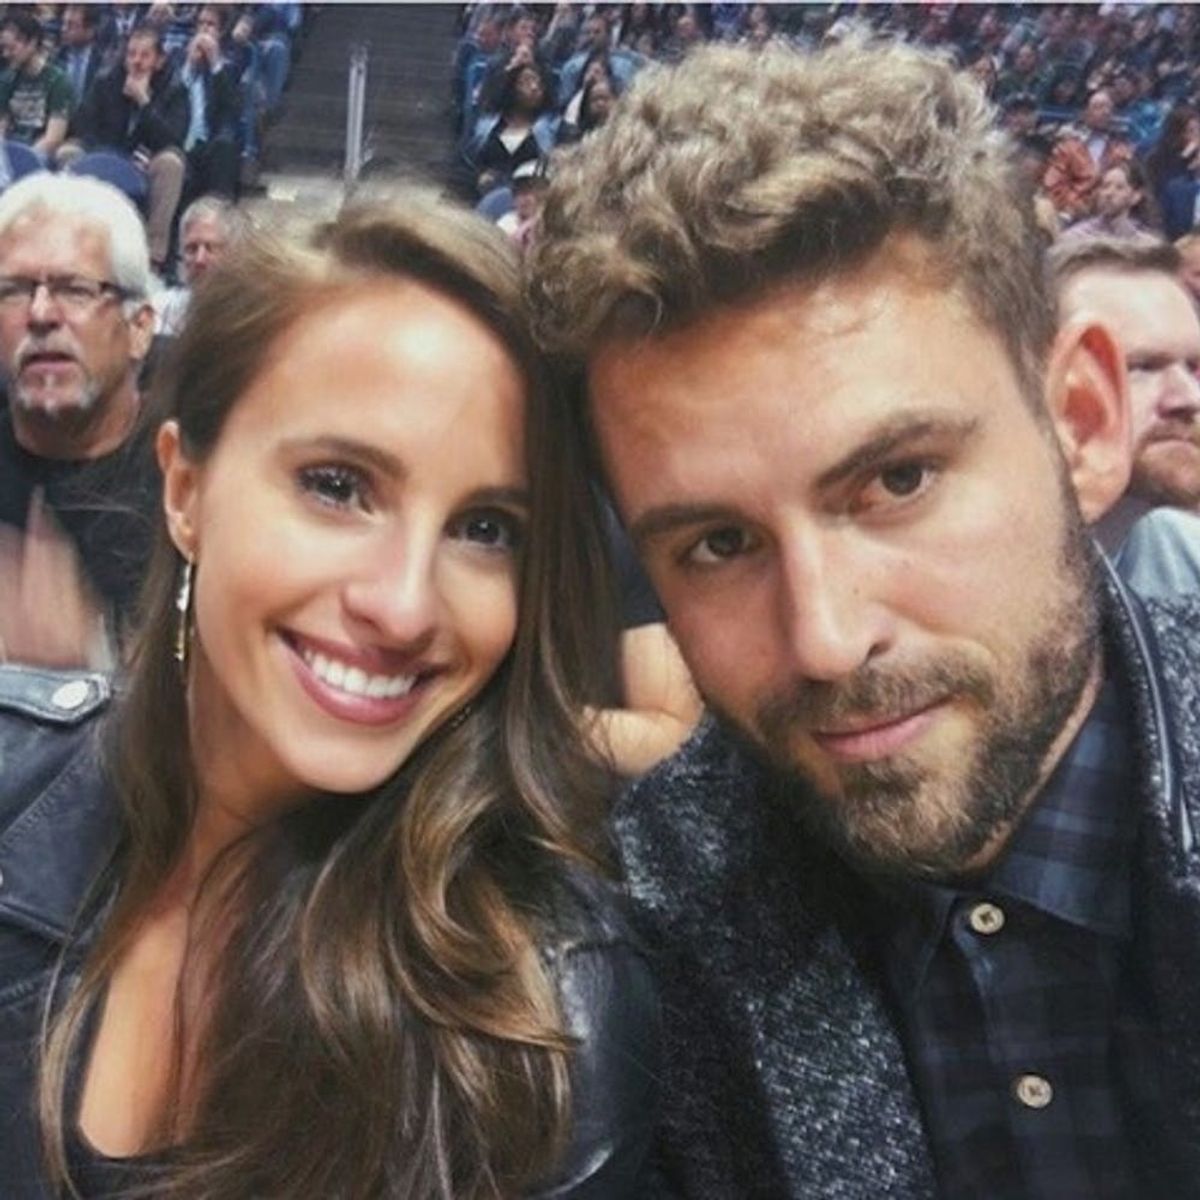 Nick Viall Reveals That No Wedding Is in Sight, Claiming It’s “Too Early” to Marry Vanessa